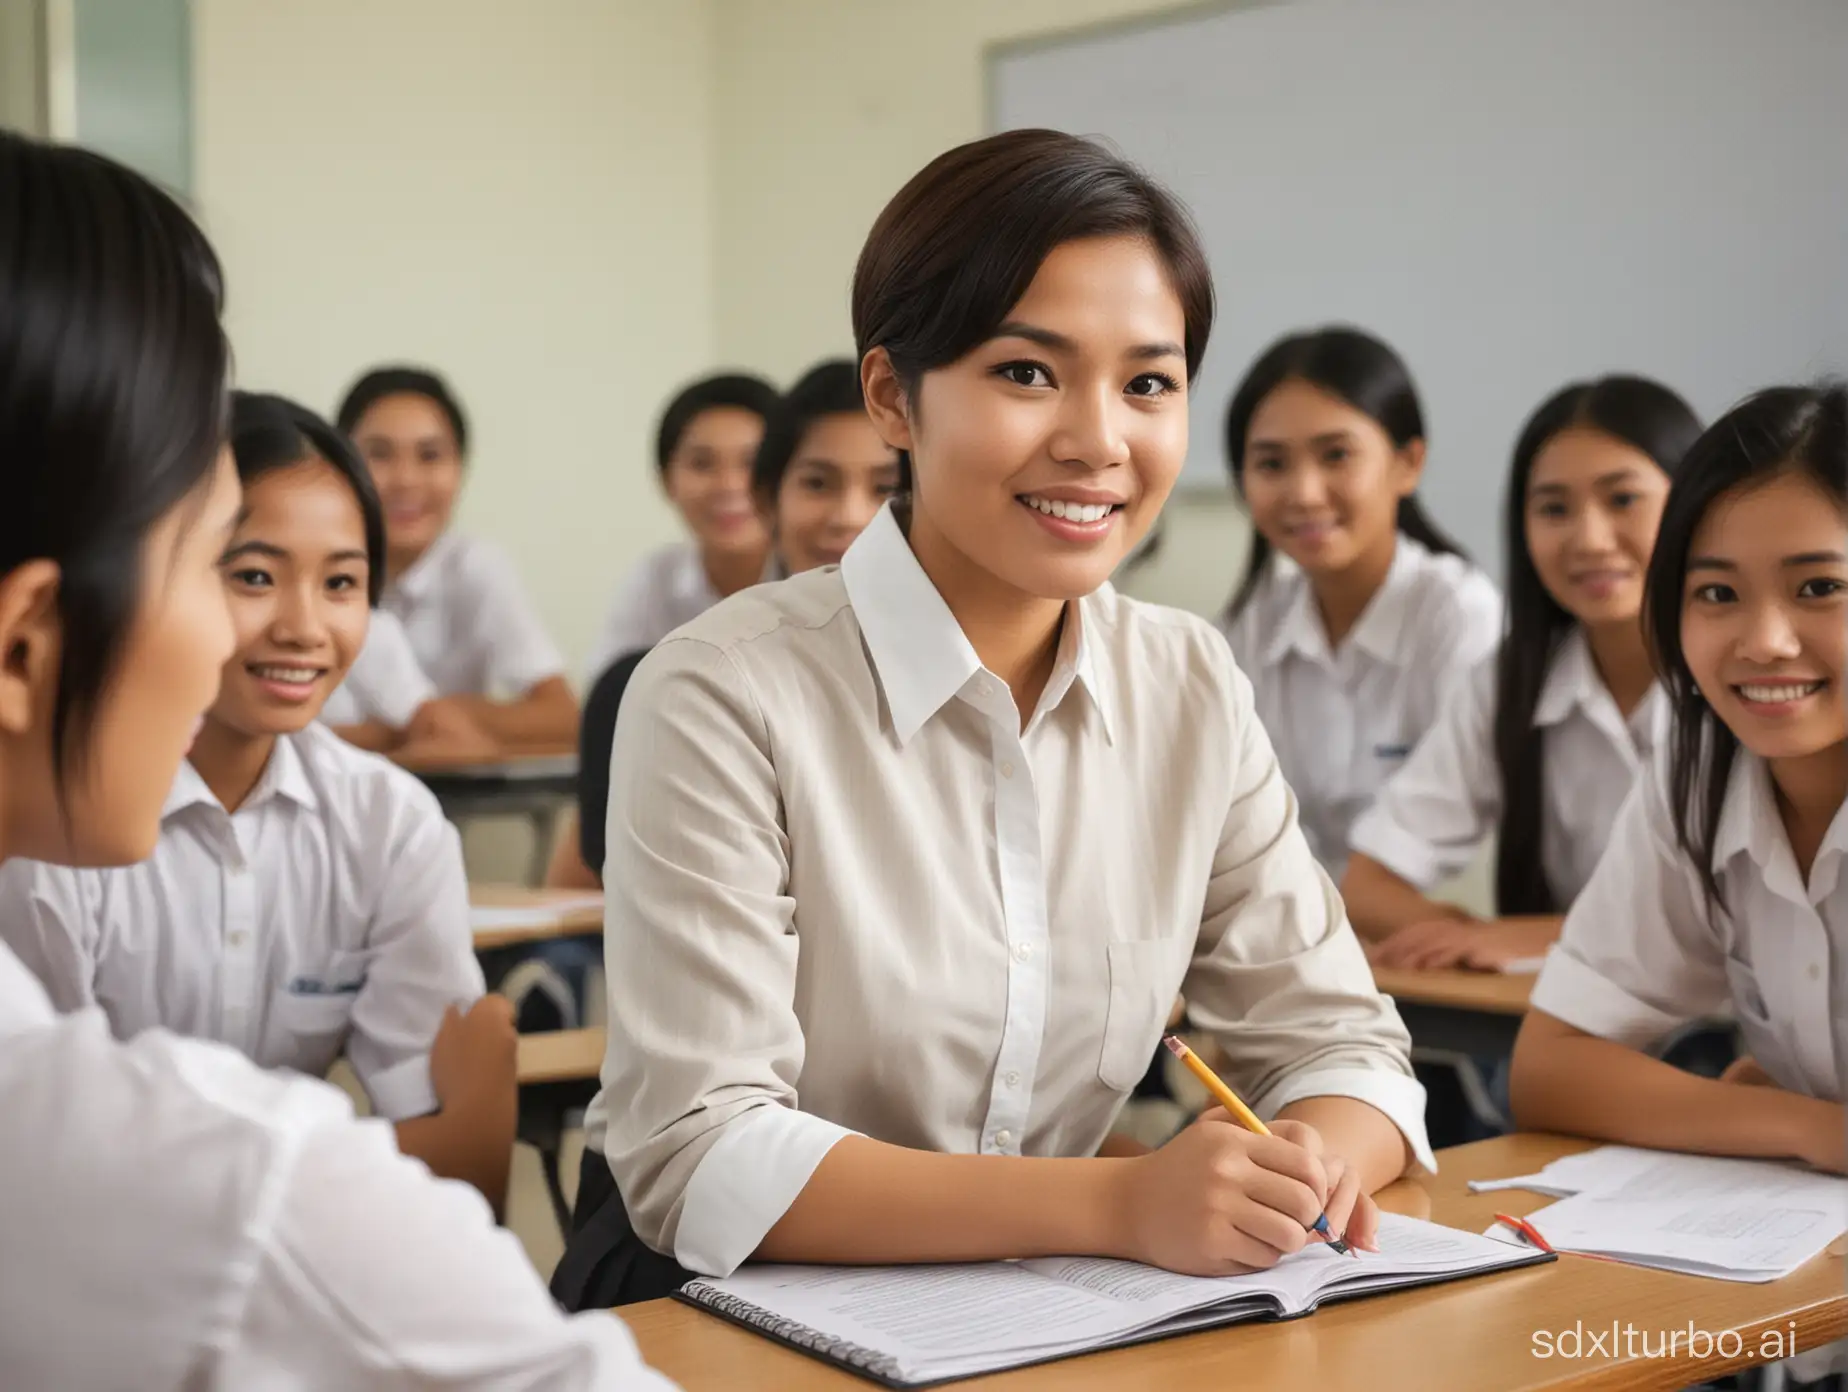 Create a picture where a teacher talks to a class of students english class, hospitality school. The students are 17 years old. The teacher is Indonesian women 40 years old, short hair, chubby